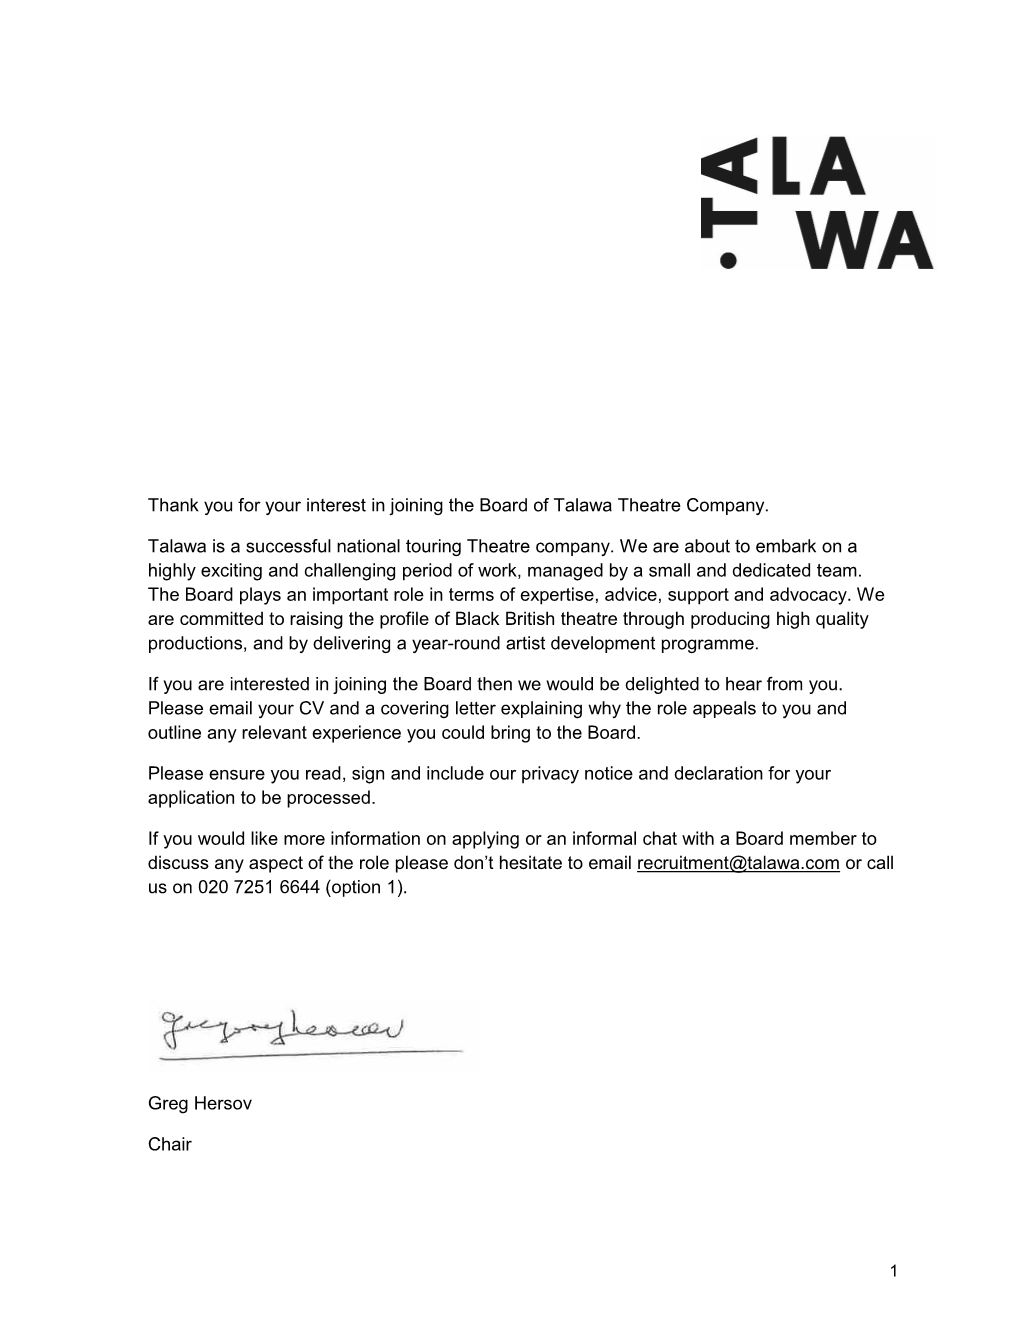 Thank You for Your Interest in Joining the Board of Talawa Theatre Company. Talawa Is a Successful National Touring Theatre Comp